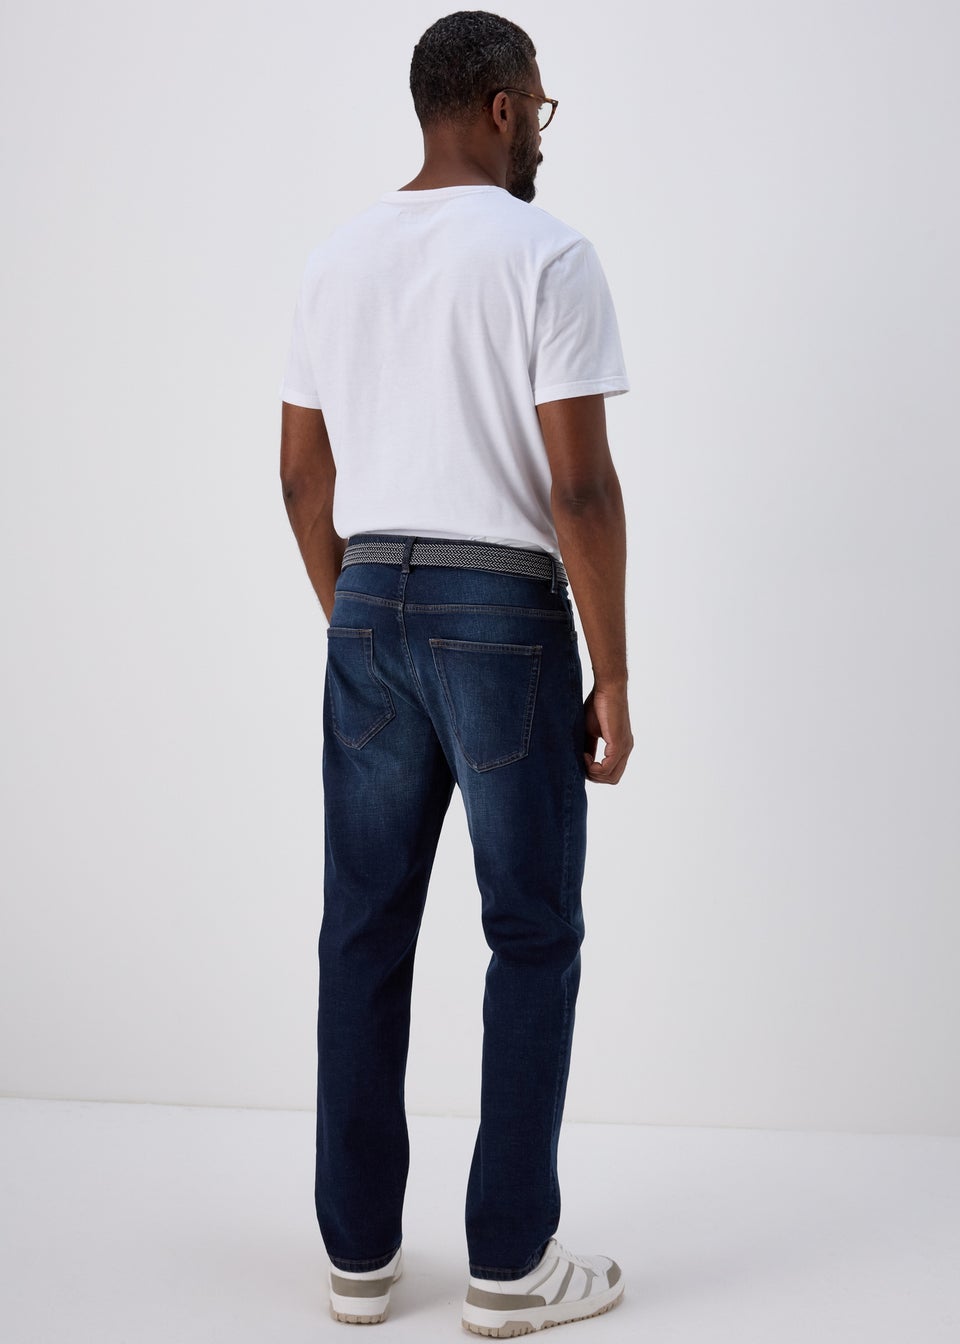 Lincoln Blue Belted Jeans